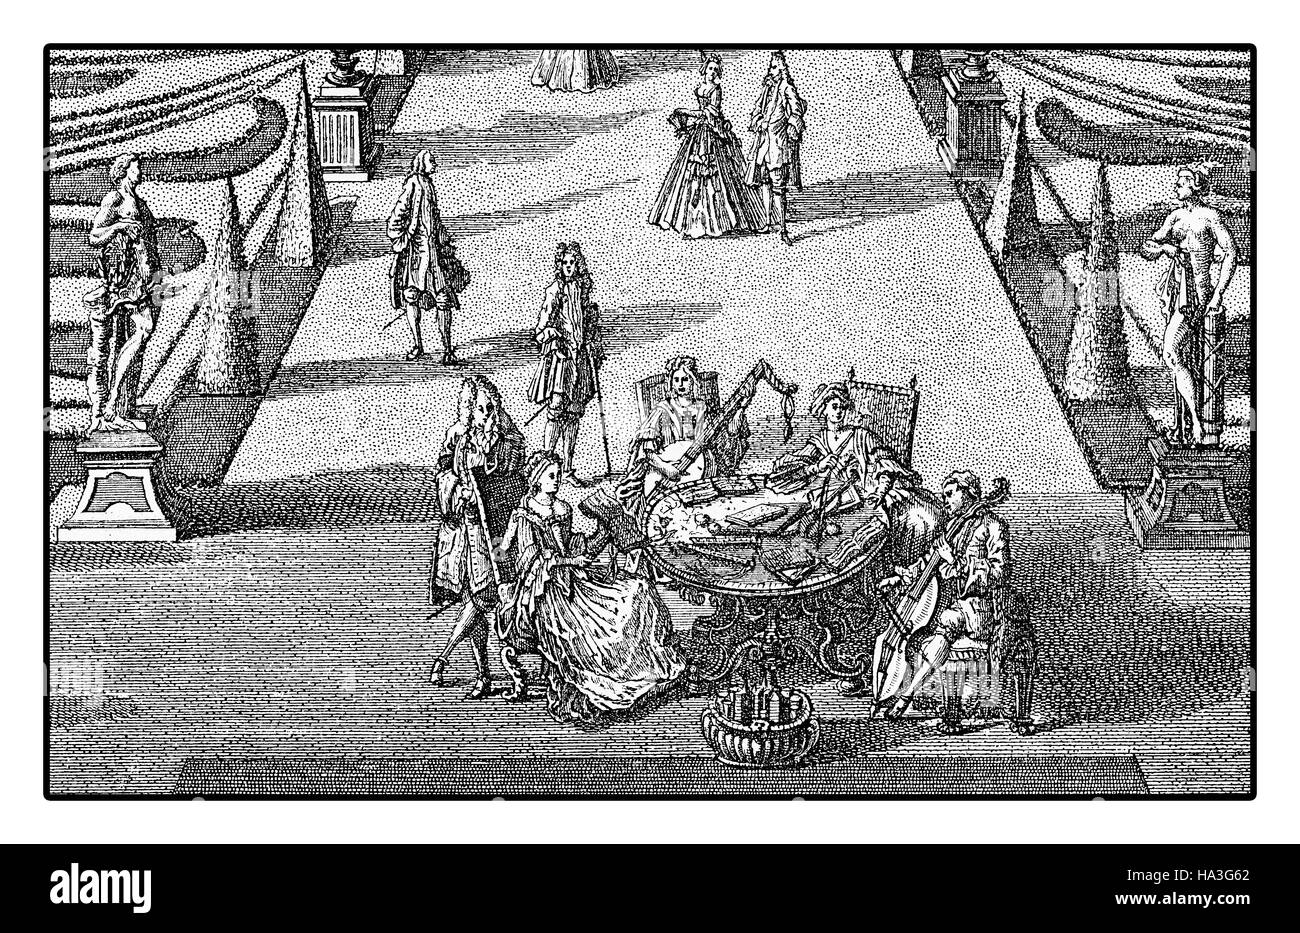 Marriage feast and leisure celebration with music entertainment in garden, engraving 18th  century Stock Photo